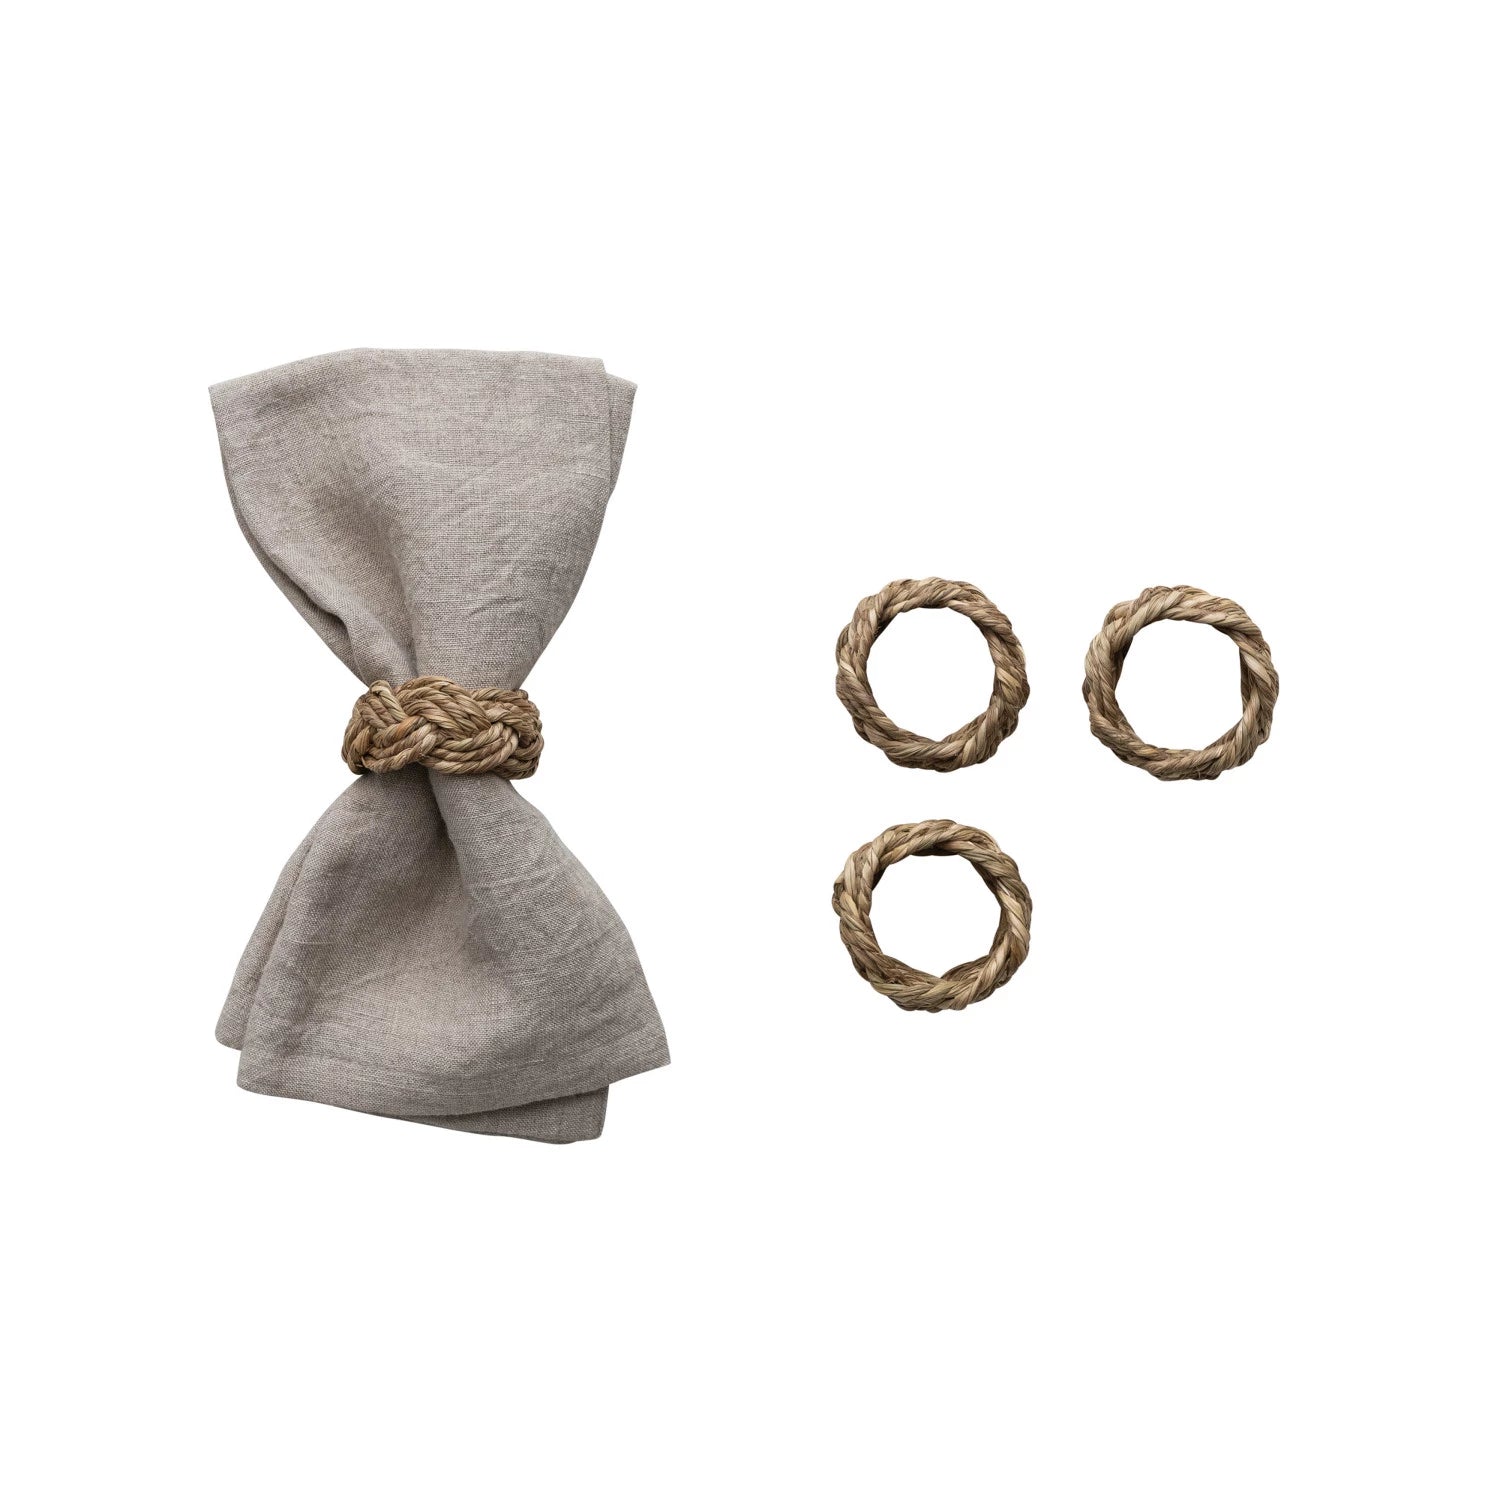 Round Braided Seagrass Napkin Rings, Set of 4 in Box - 2"